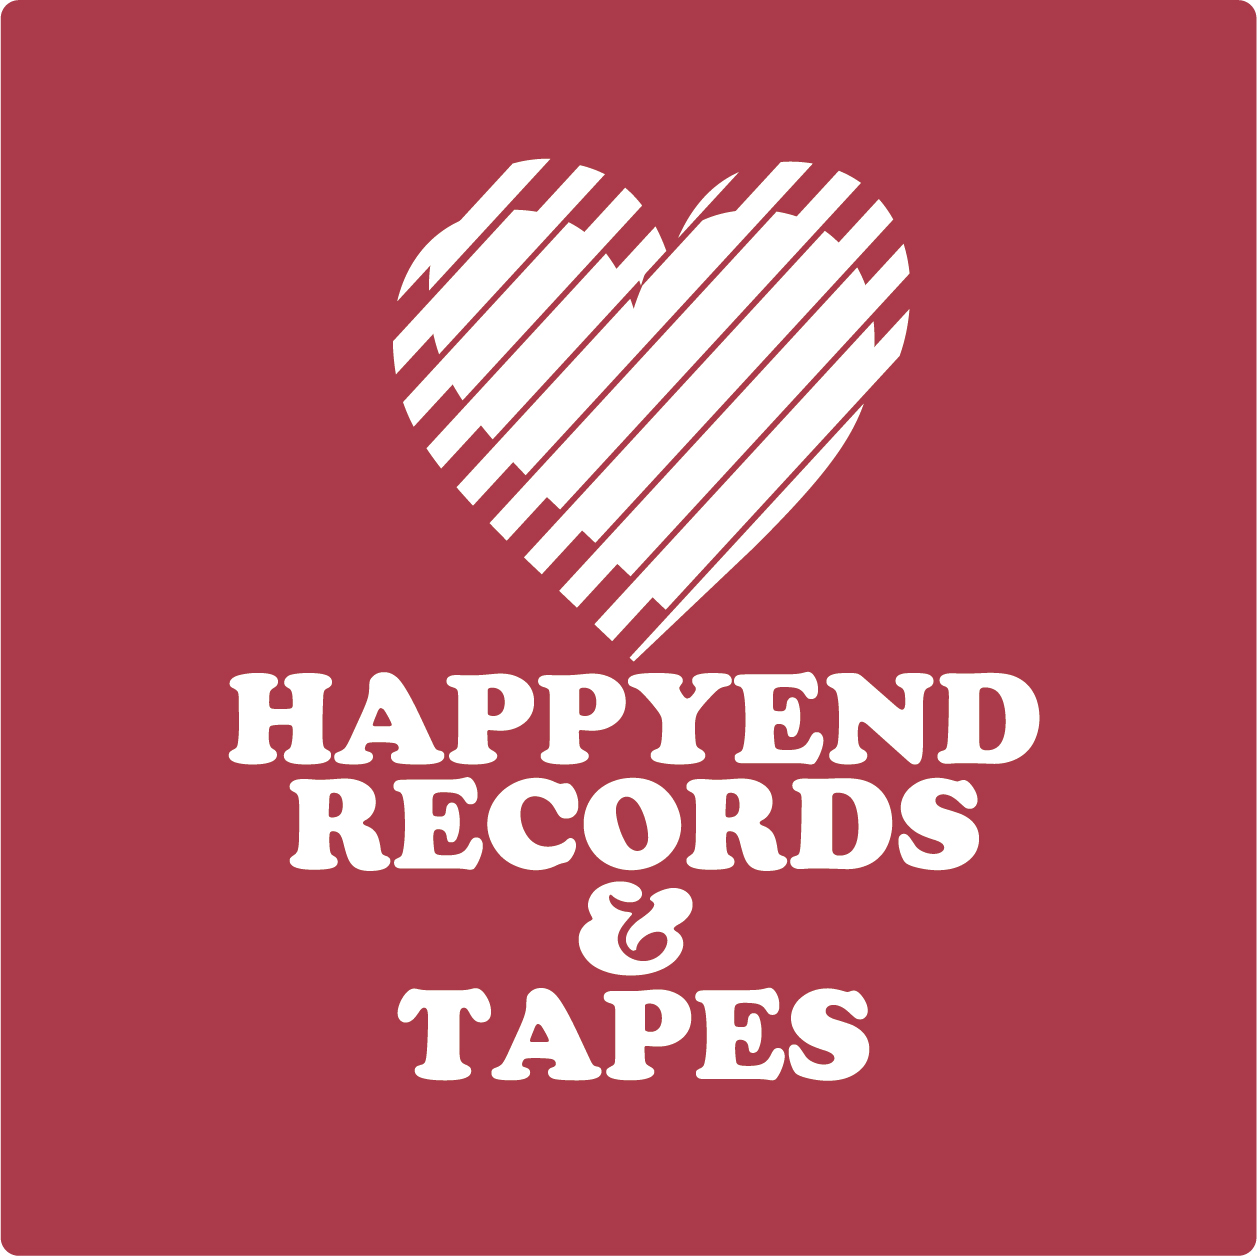 HAPPYEND RECORDS & TAPES